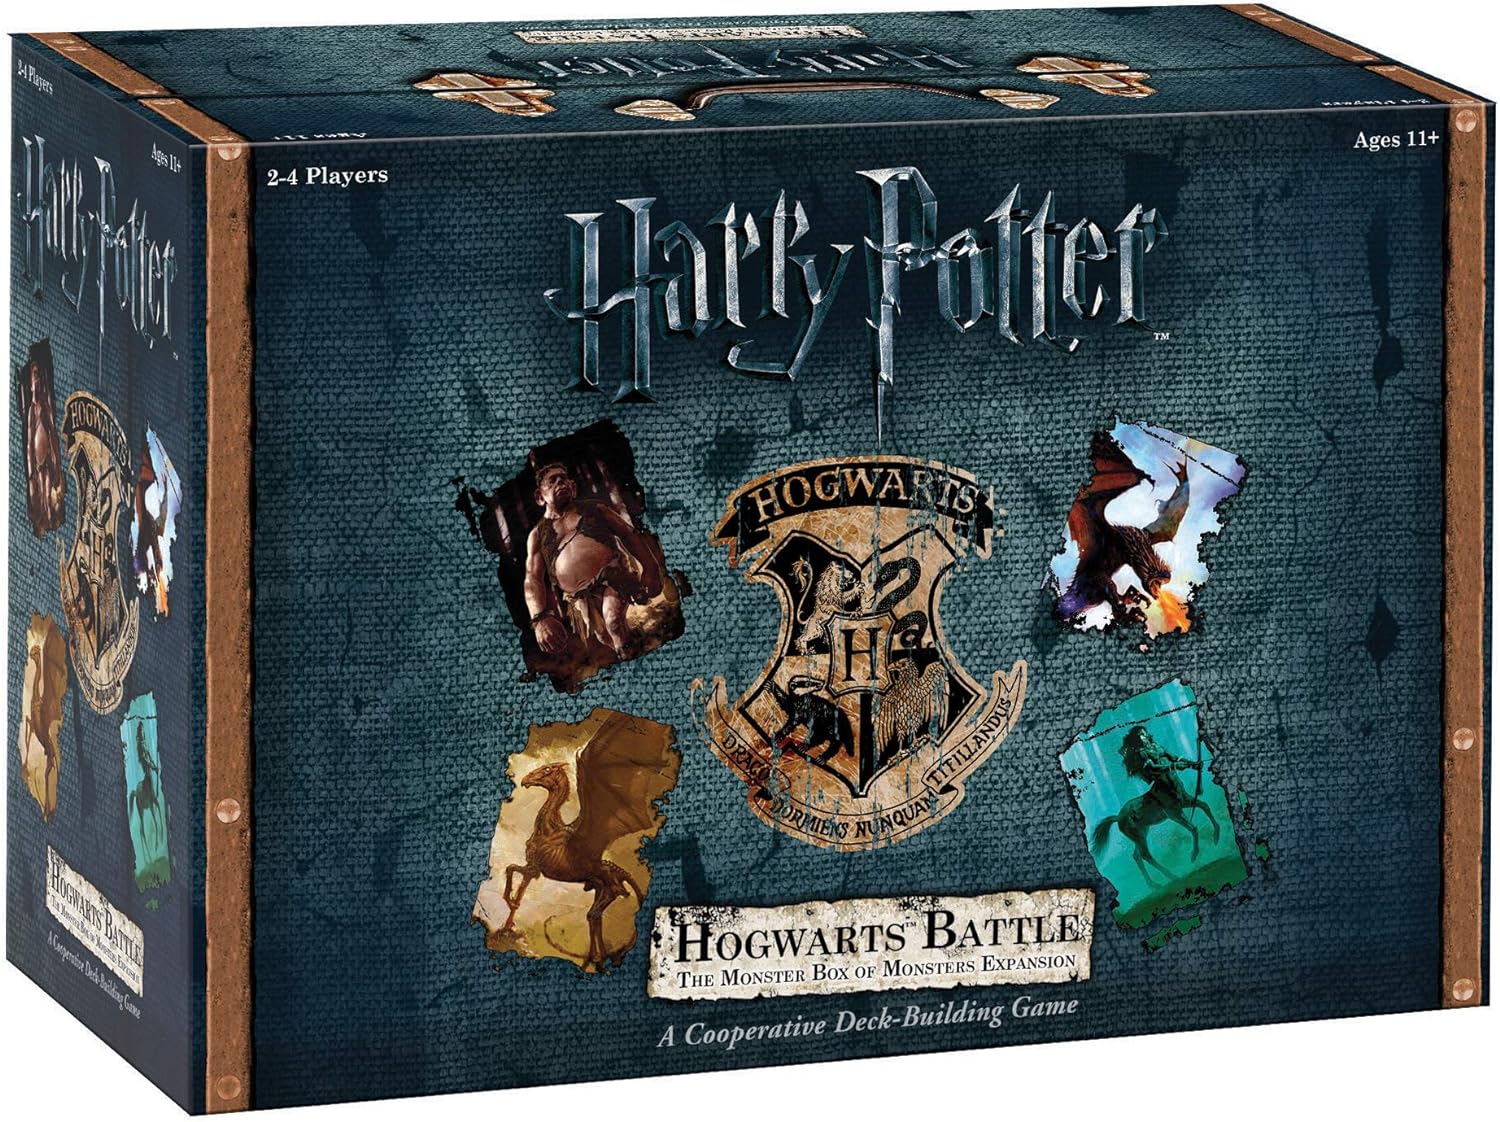 Harry Potter Hogwarts Battle: The Monster Box of Monsters Expansion Card Game $24.39 + Free Shipping w/ Prime or on $35+